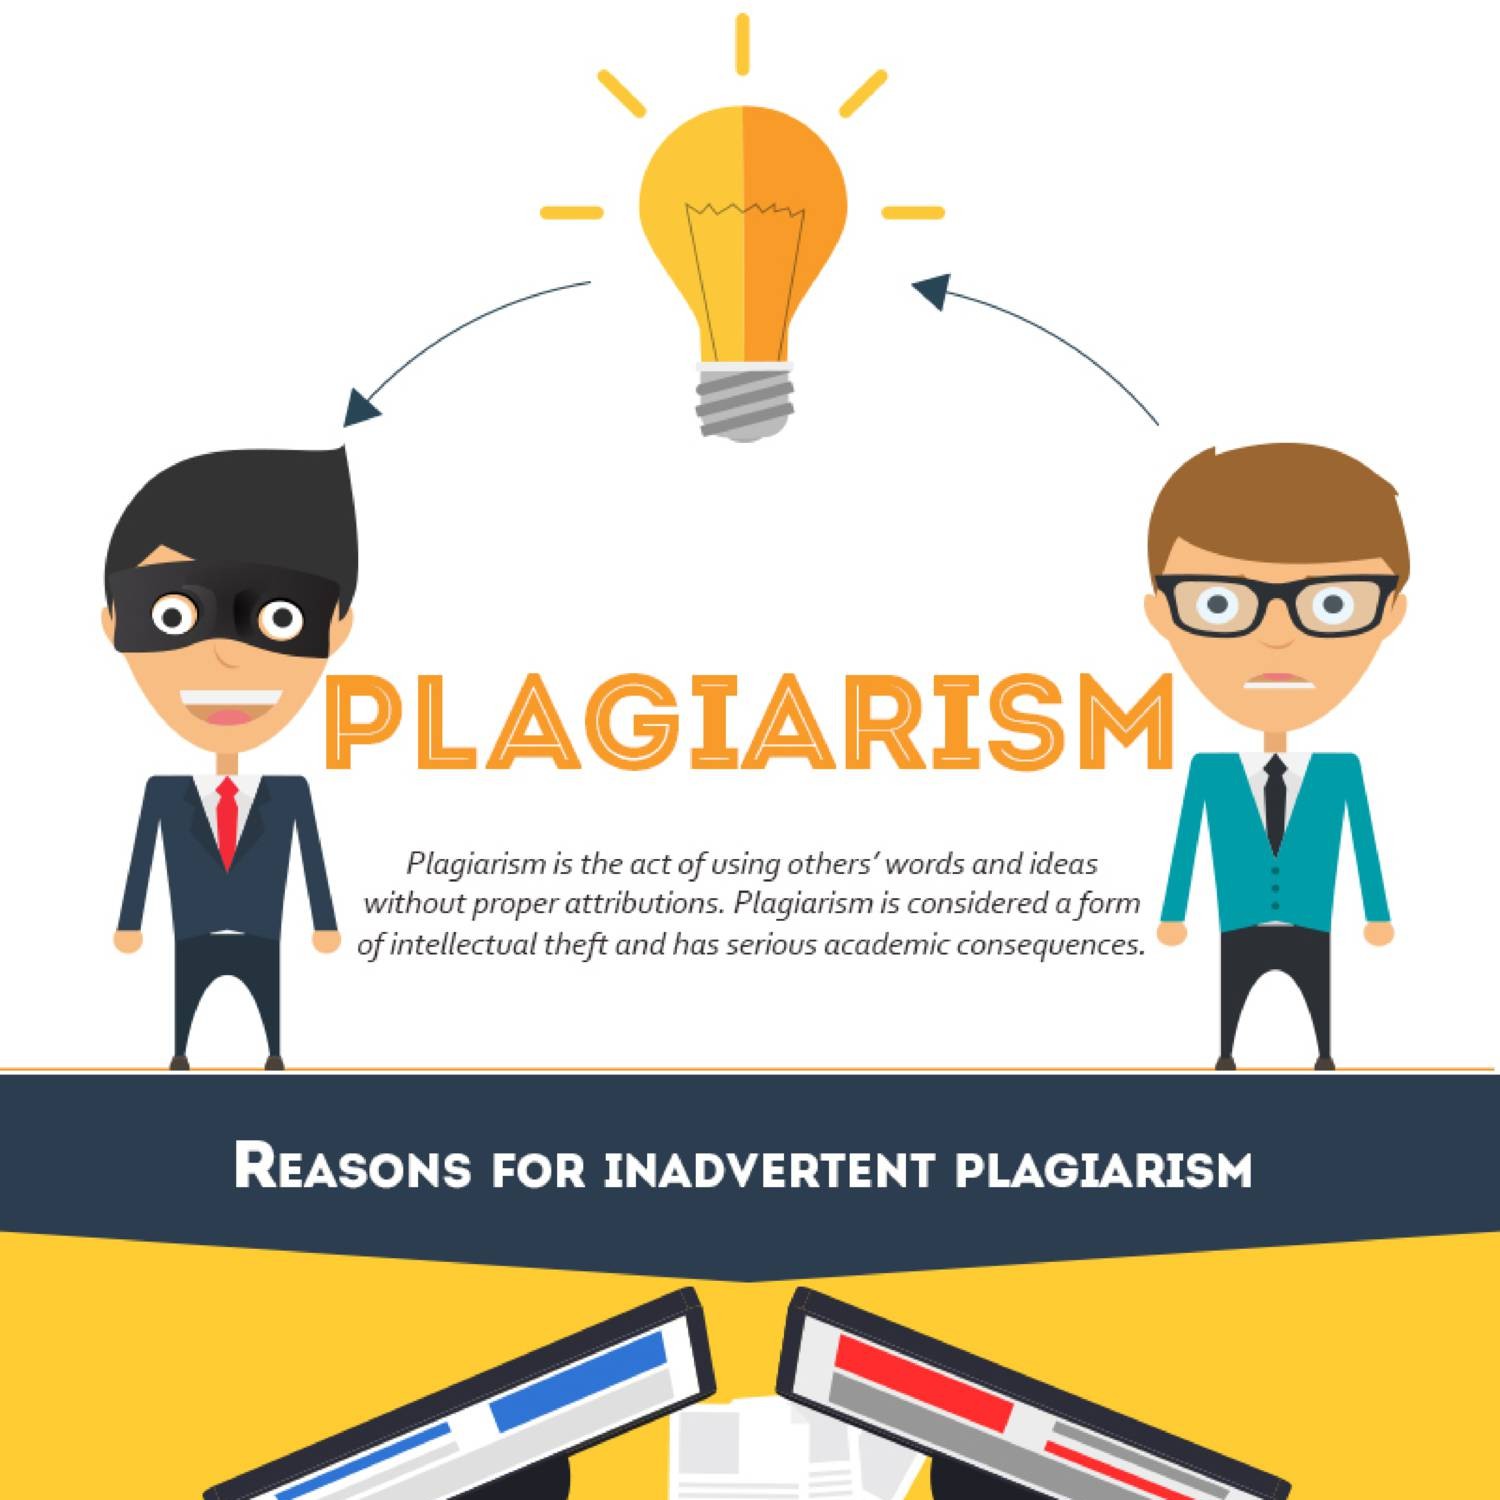 research topics about plagiarism